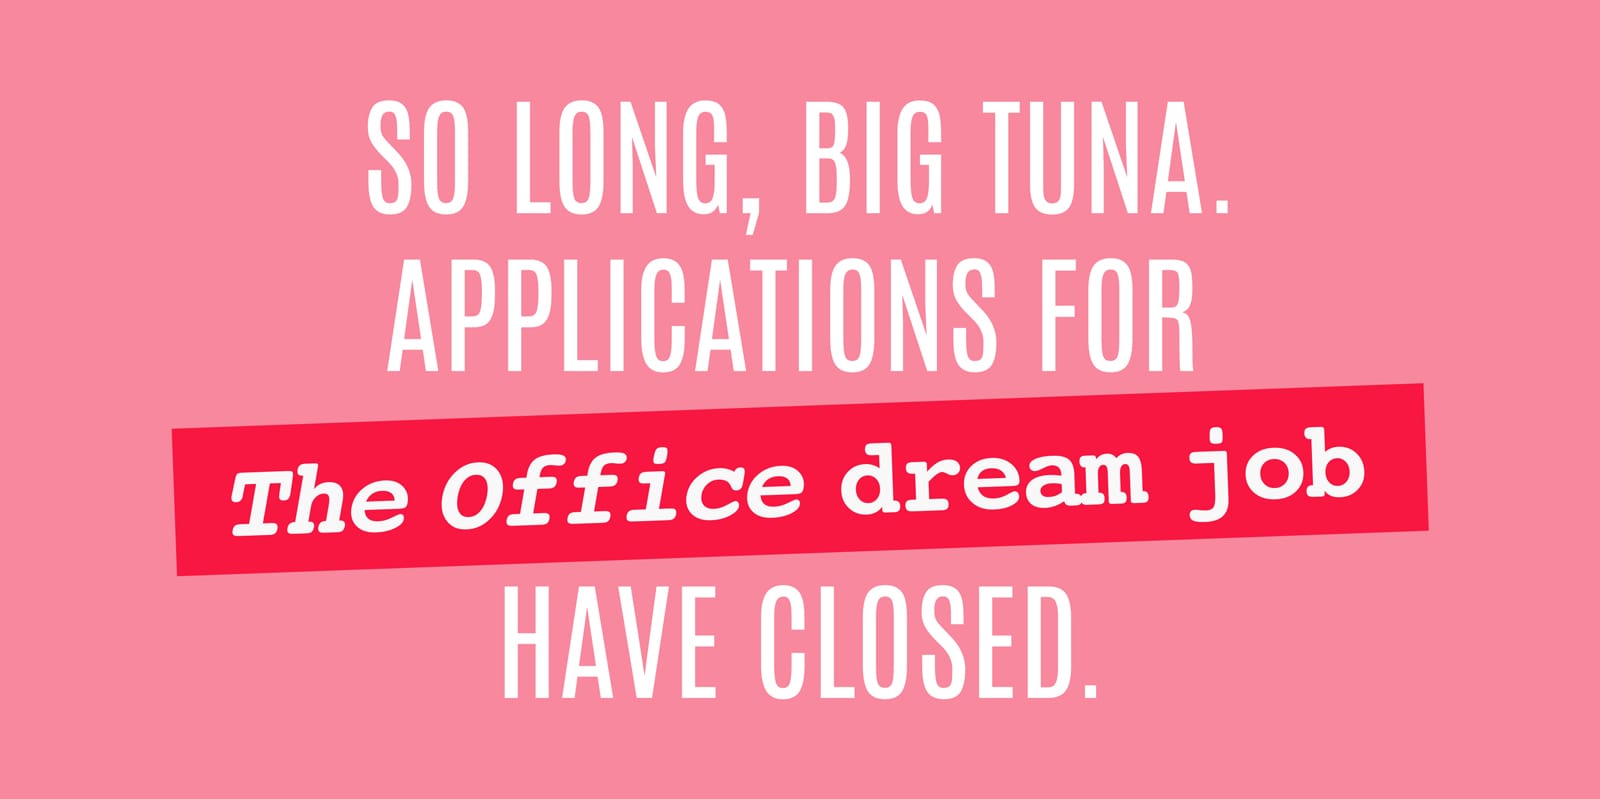 So Long, Big Tuna, applications for The Office dream job have closed